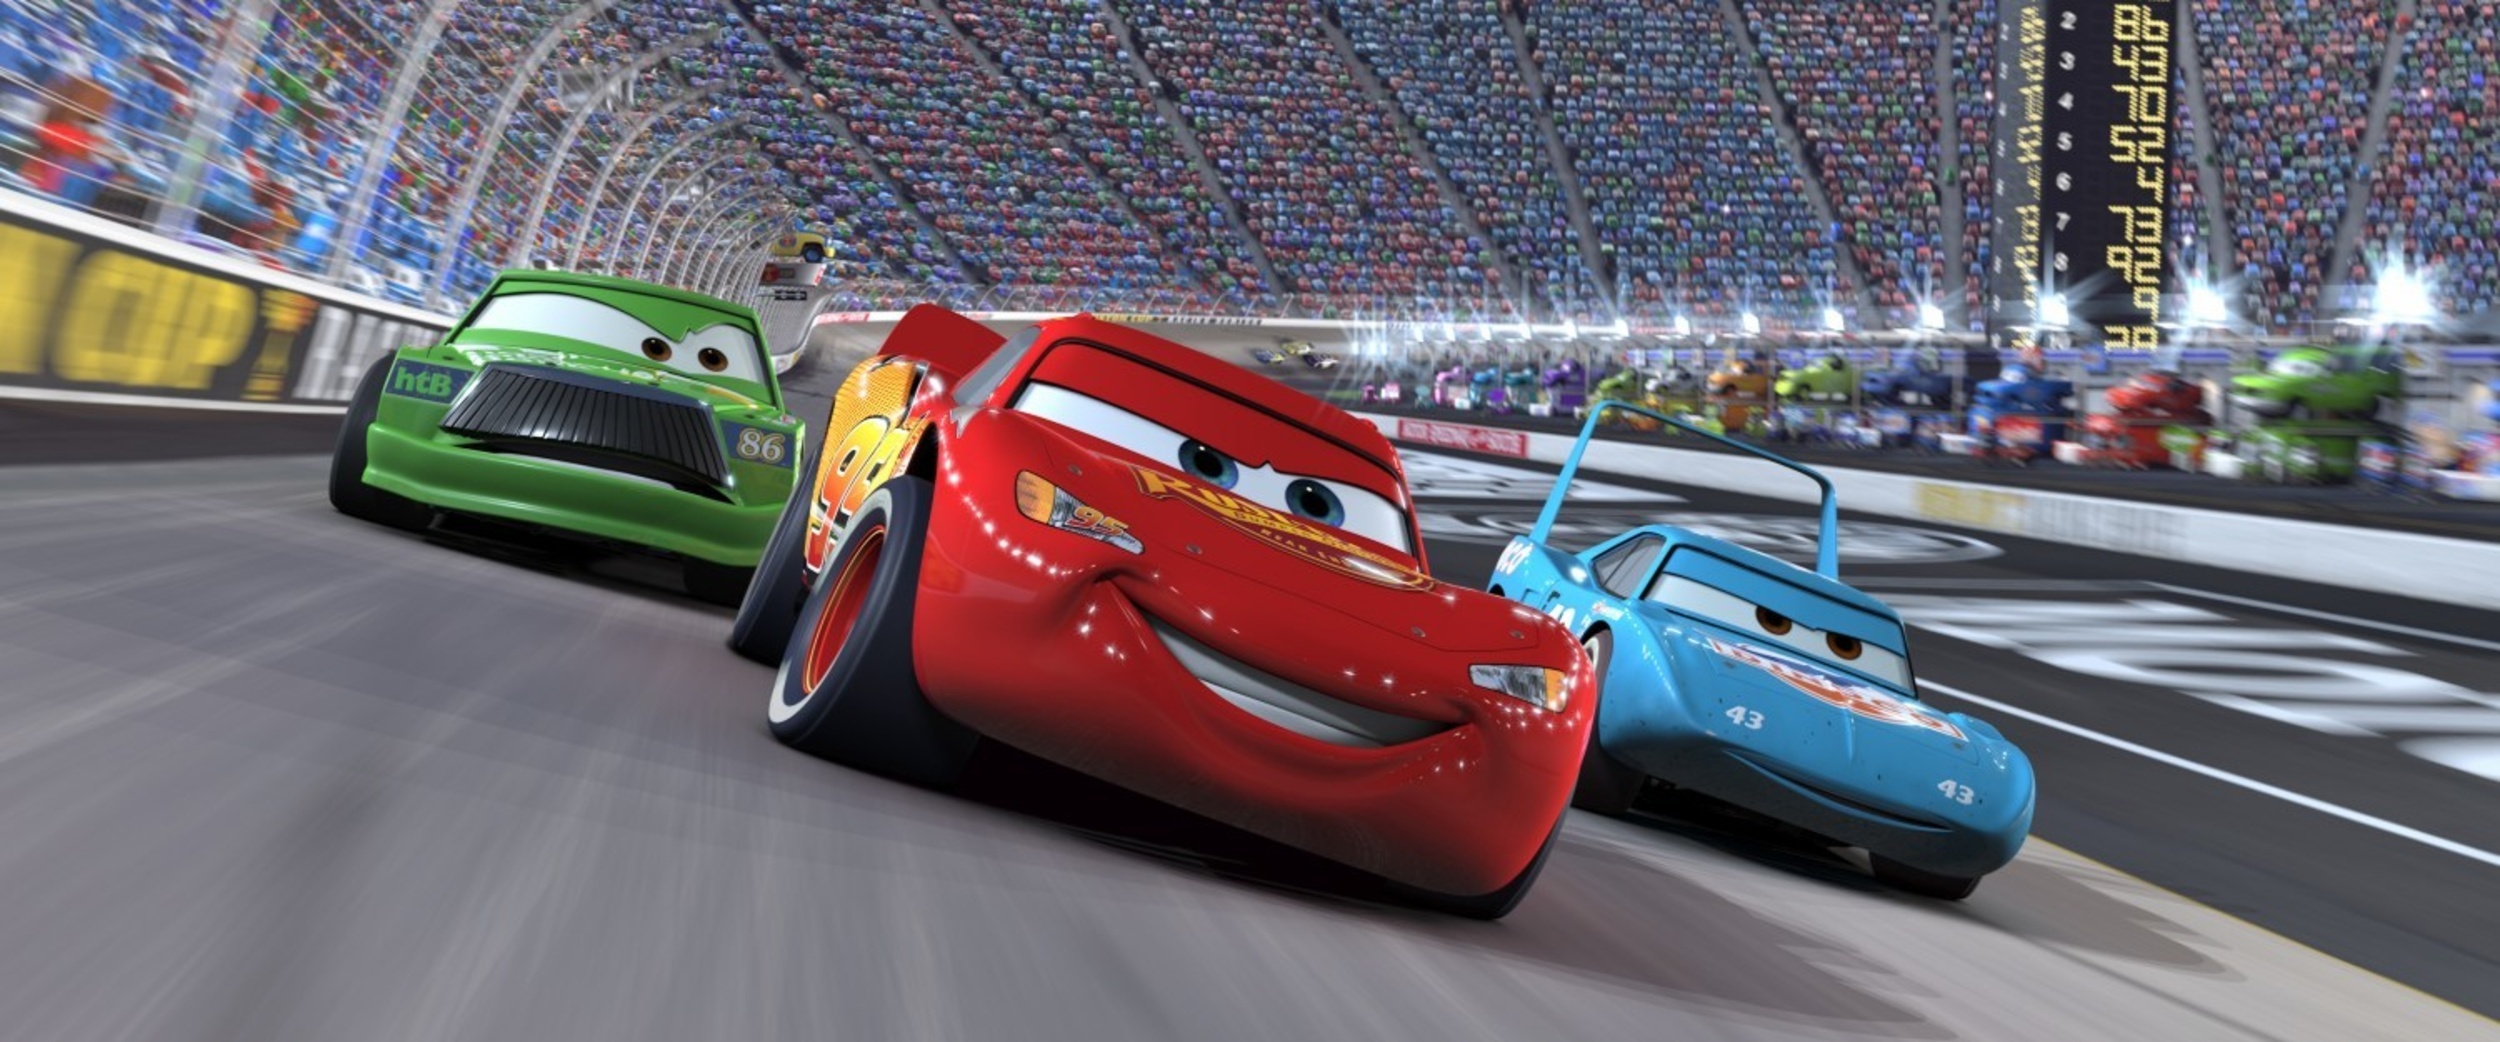 <p><span><em>Fast & Furious</em> showcased a need for speed in cinema in 2001, and a handful of years later, Disney decided to take that idea and spin it into the world of <em>Cars</em>, led by none other than Lightning McQueen.</span></p><p><a href='https://www.msn.com/en-us/community/channel/vid-cj9pqbr0vn9in2b6ddcd8sfgpfq6x6utp44fssrv6mc2gtybw0us'>Follow us on MSN to see more of our exclusive entertainment content.</a></p>